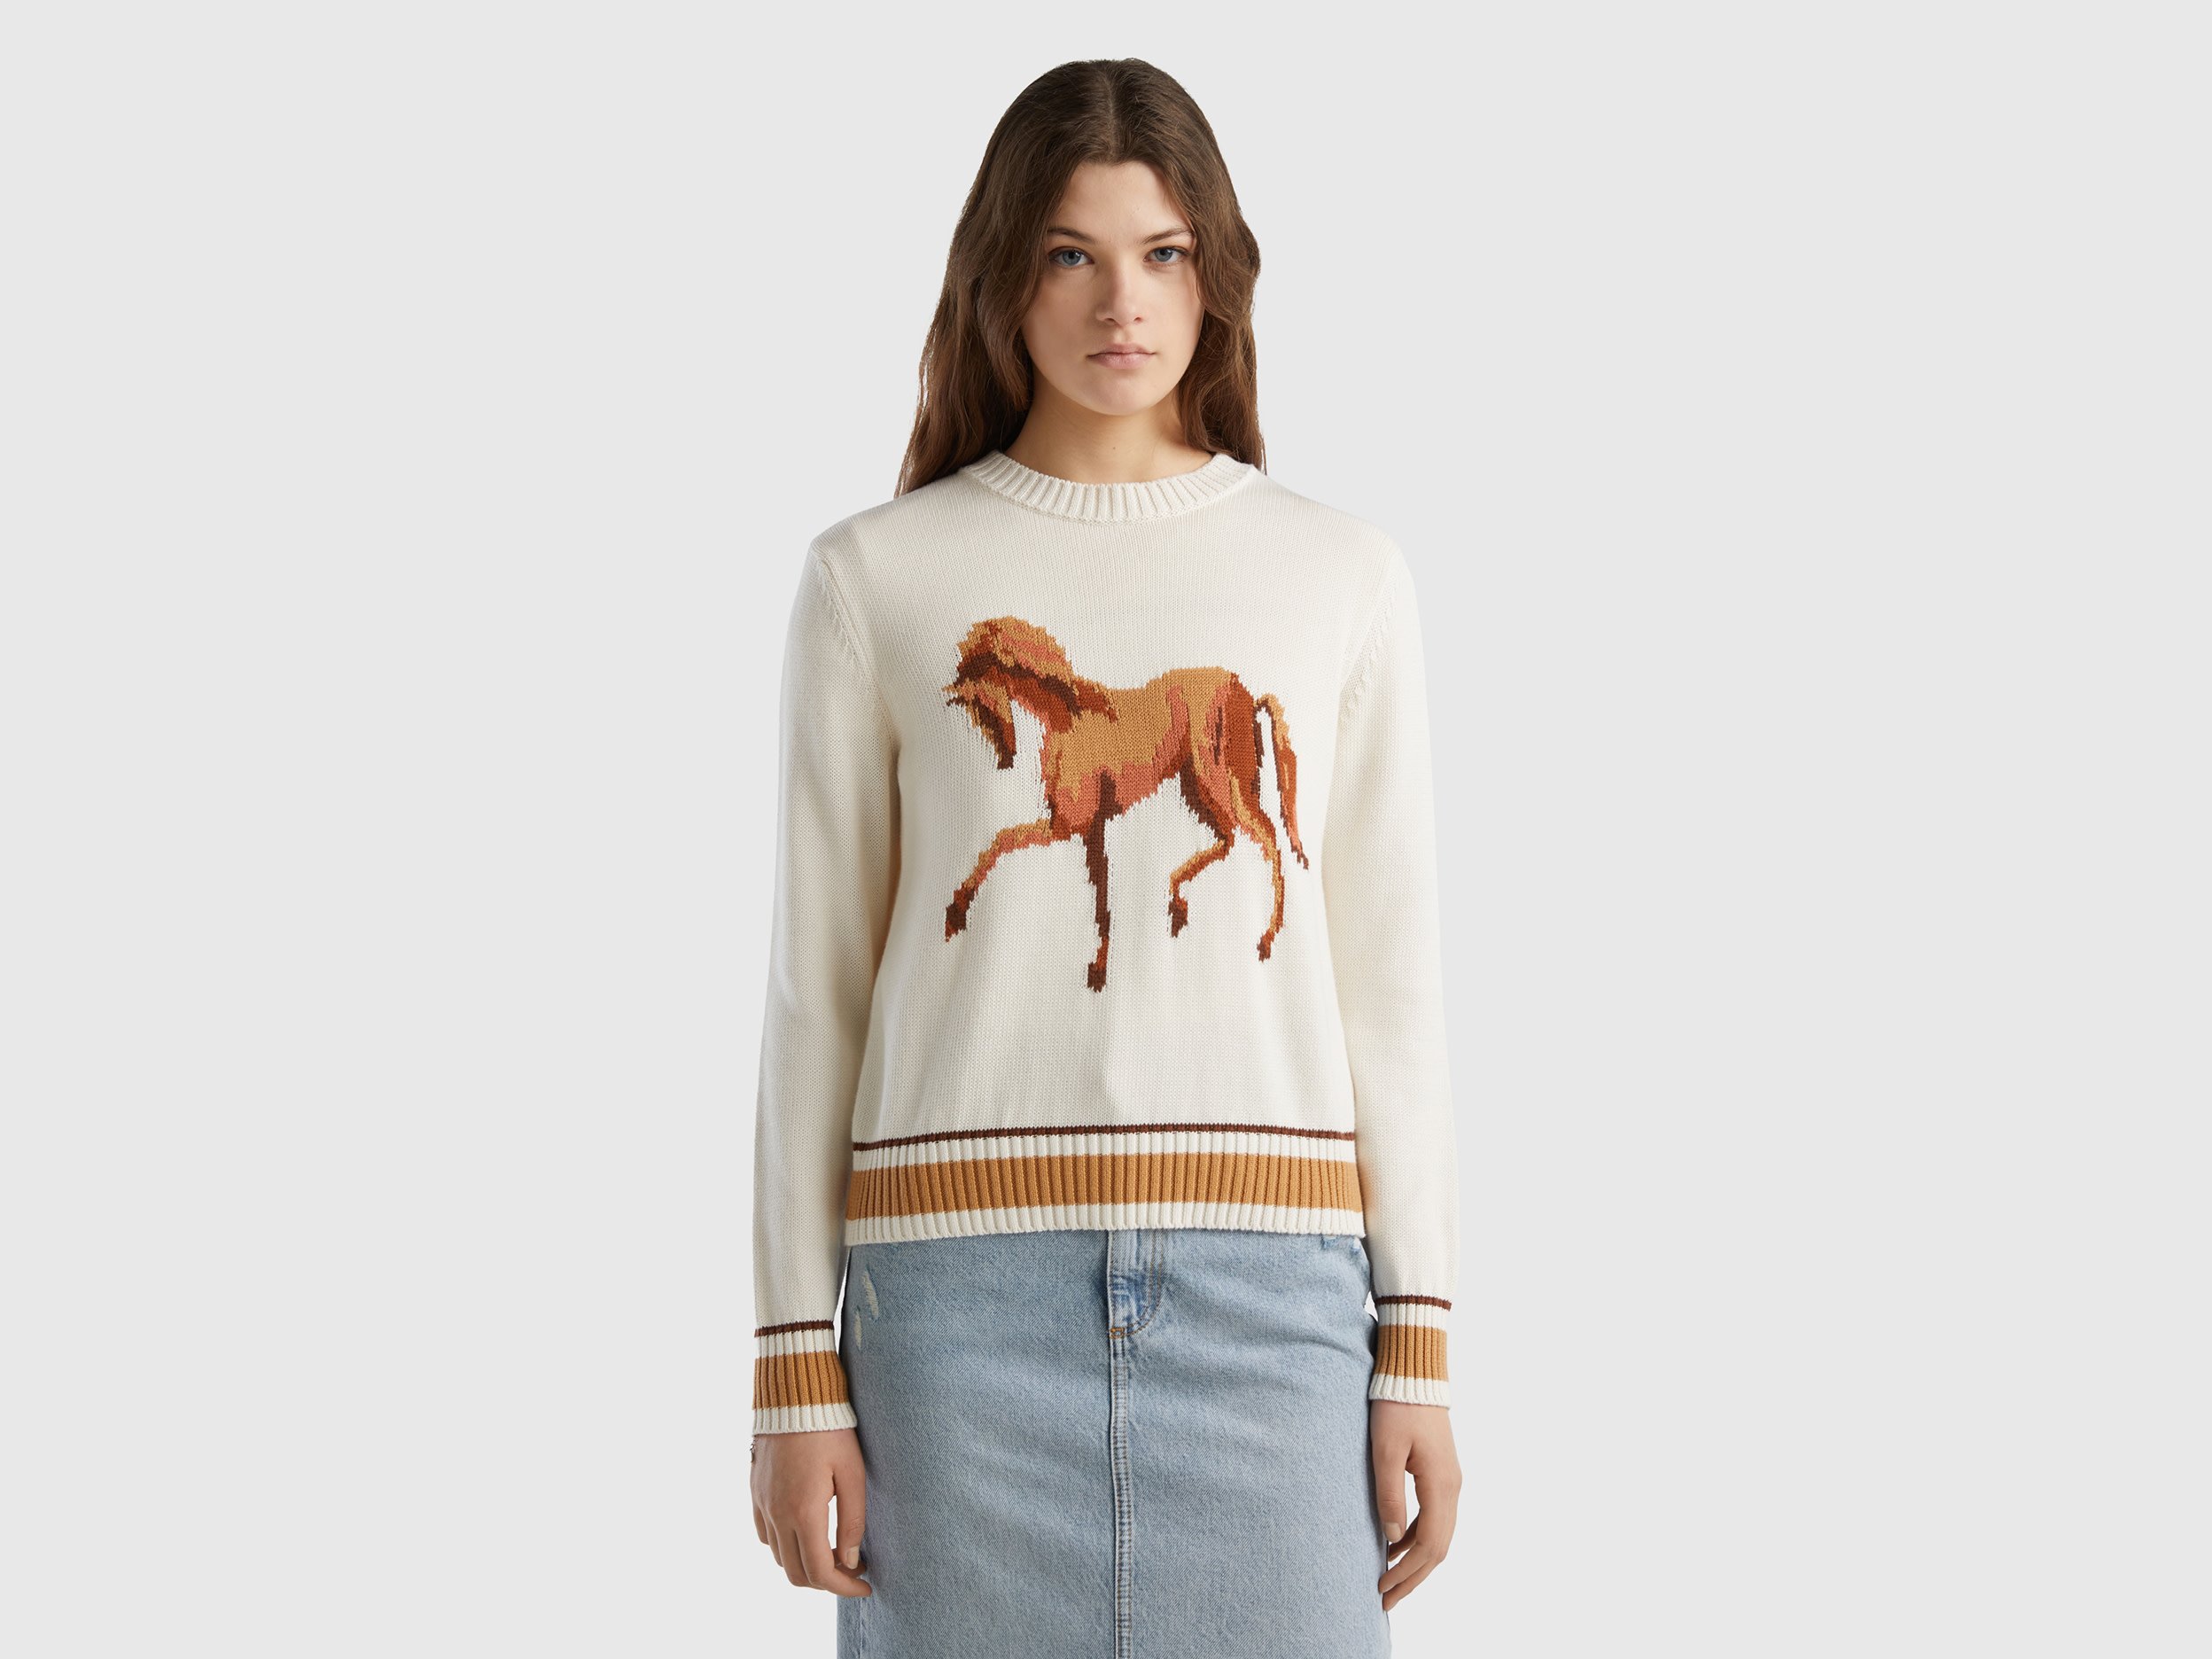 Benetton, Sweater With Horse Inlay, size S, Creamy White, Women